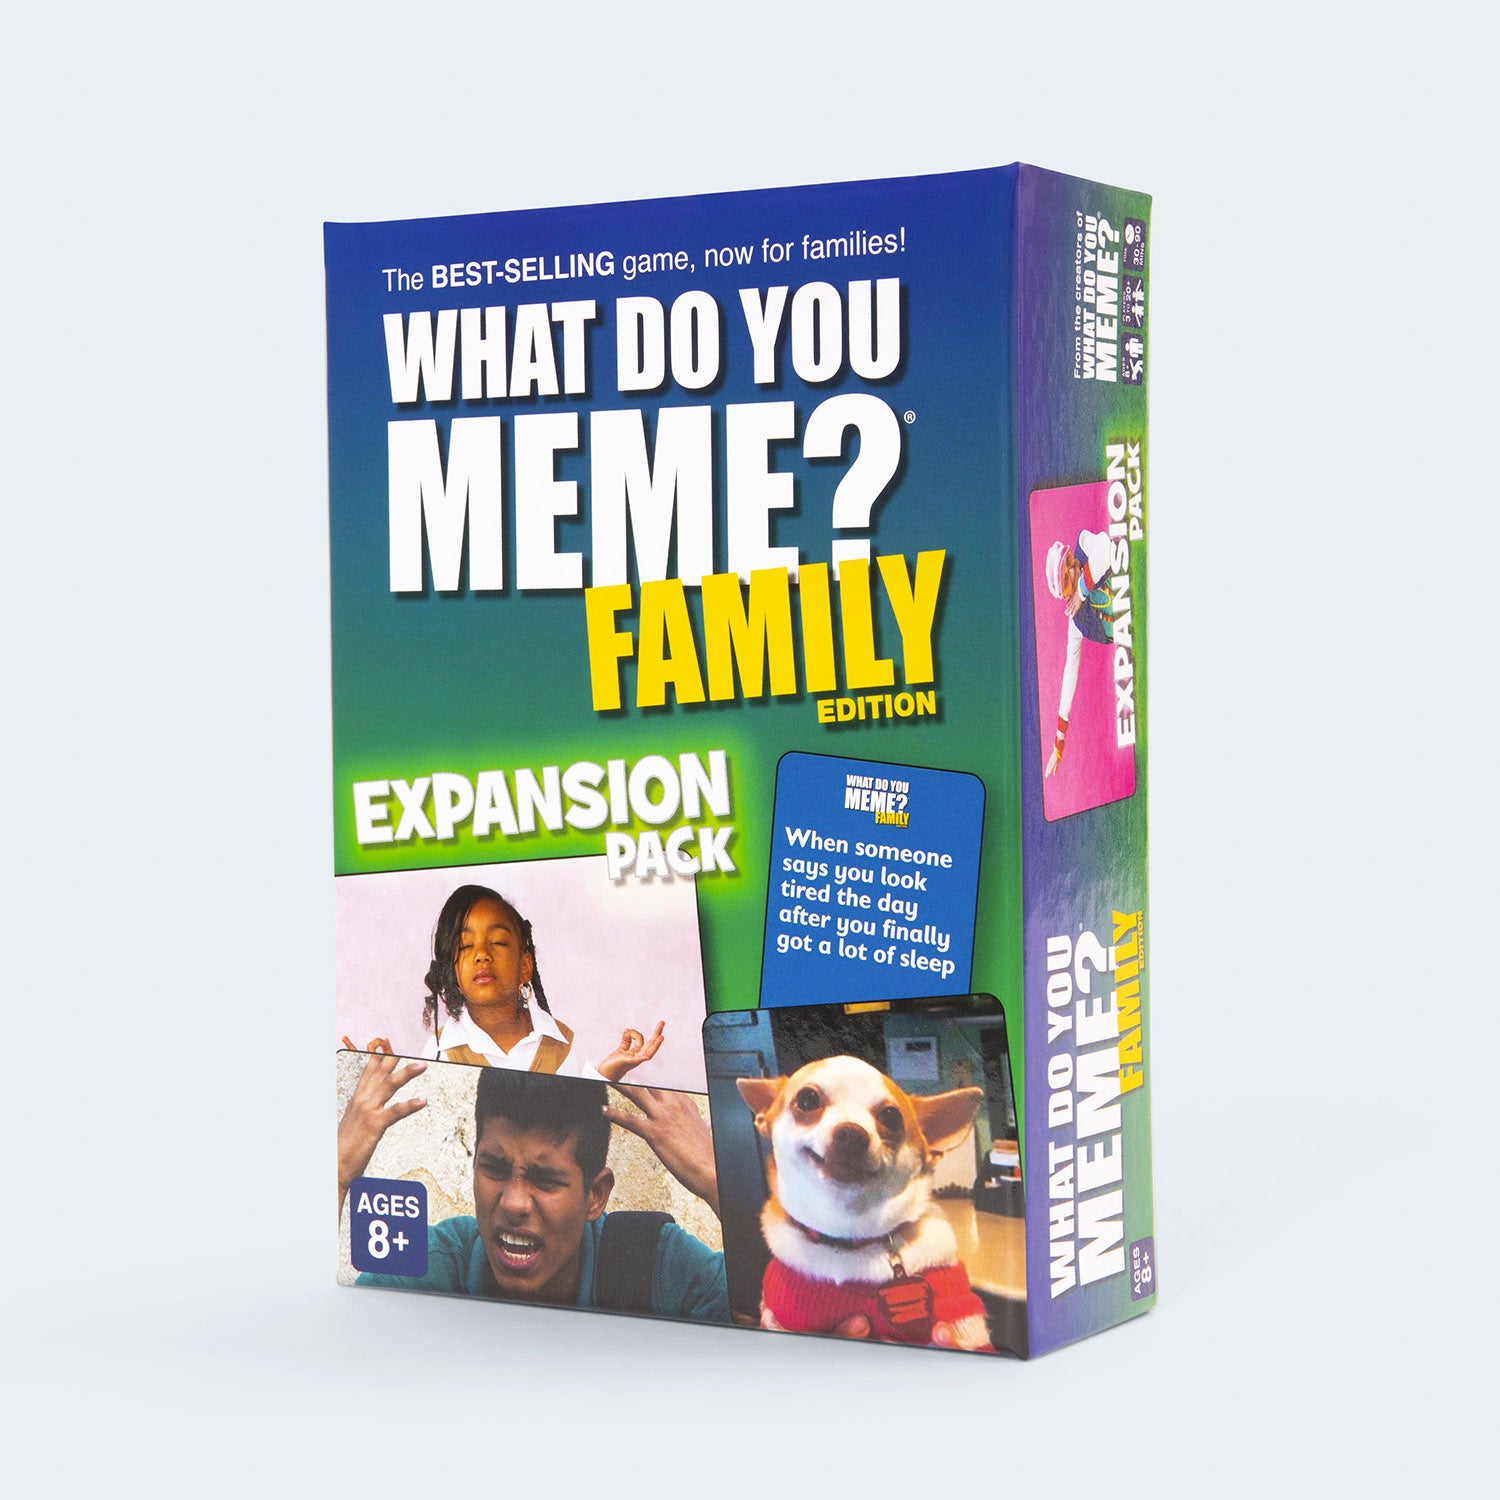 what-do-you-meme-family-edition-expansion-pack-game-box-and-game-play-03-what-do-you-meme-by-relatable